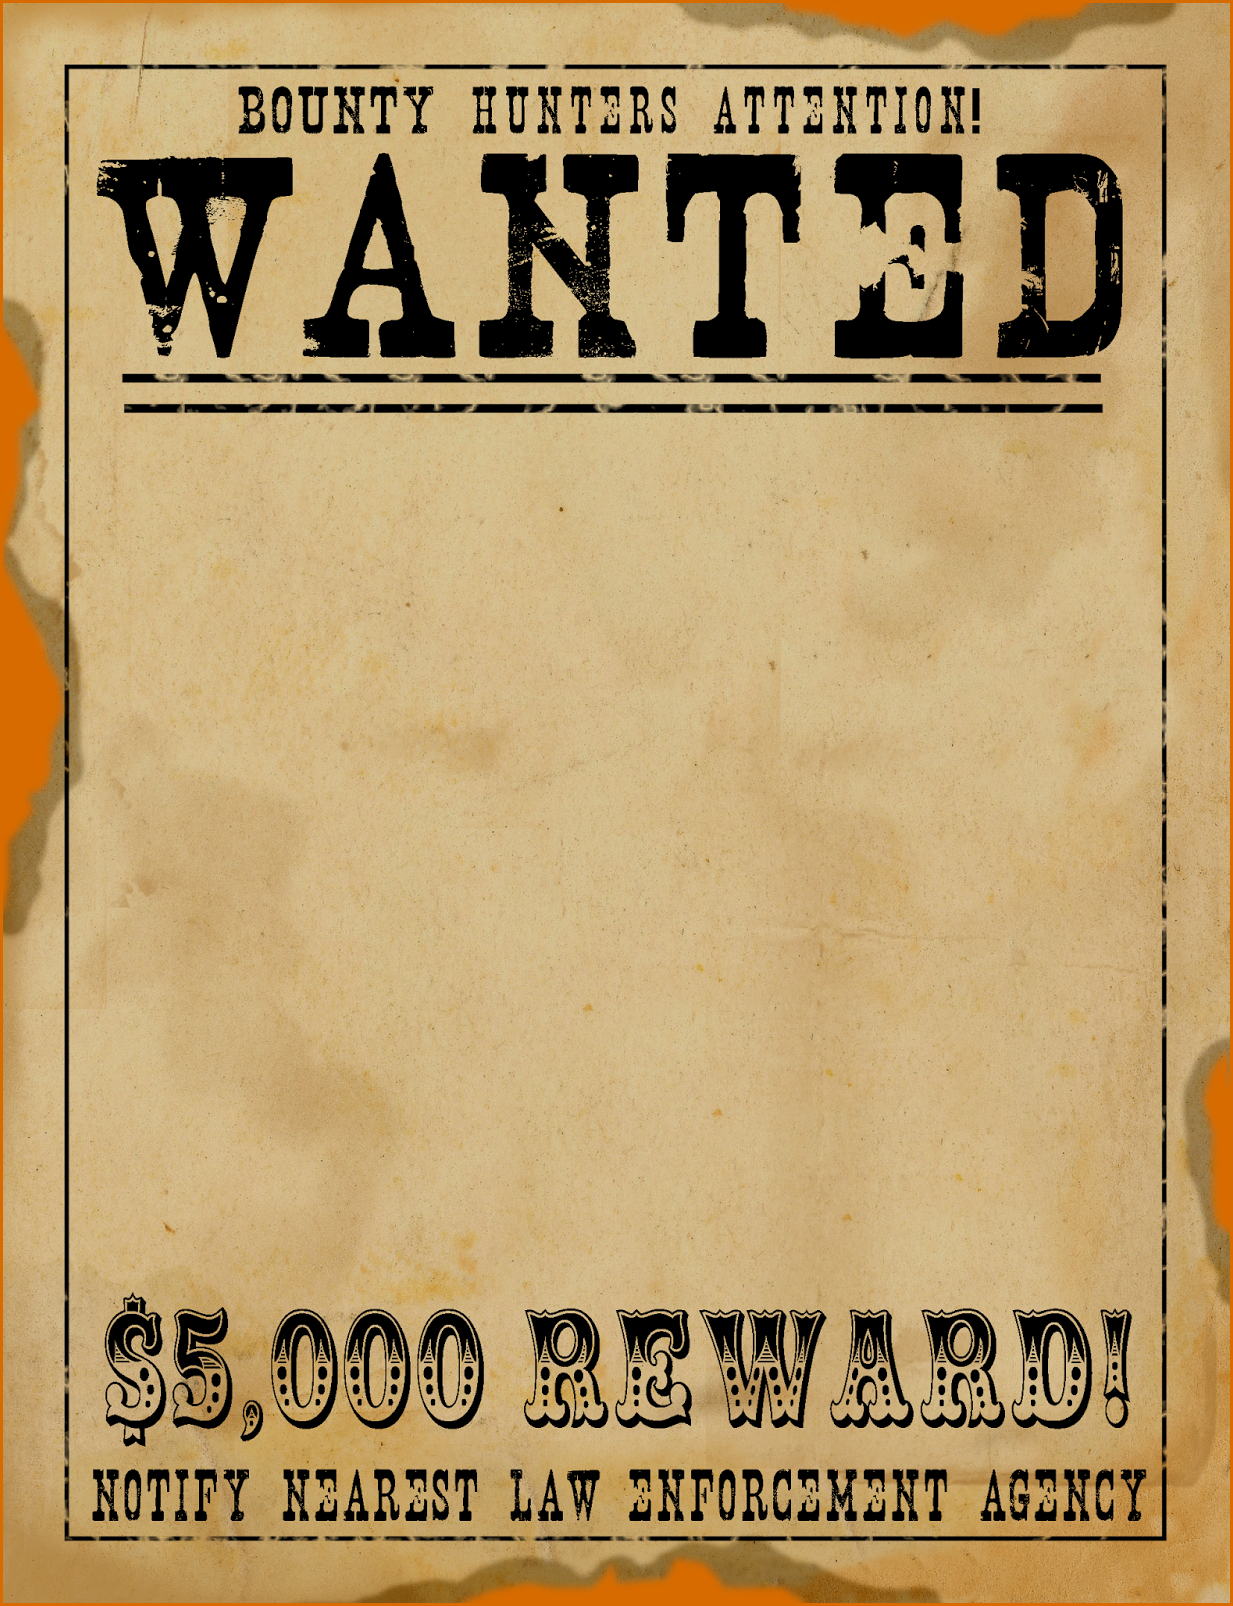 Wanted Poster Template | aplg planetariums.org